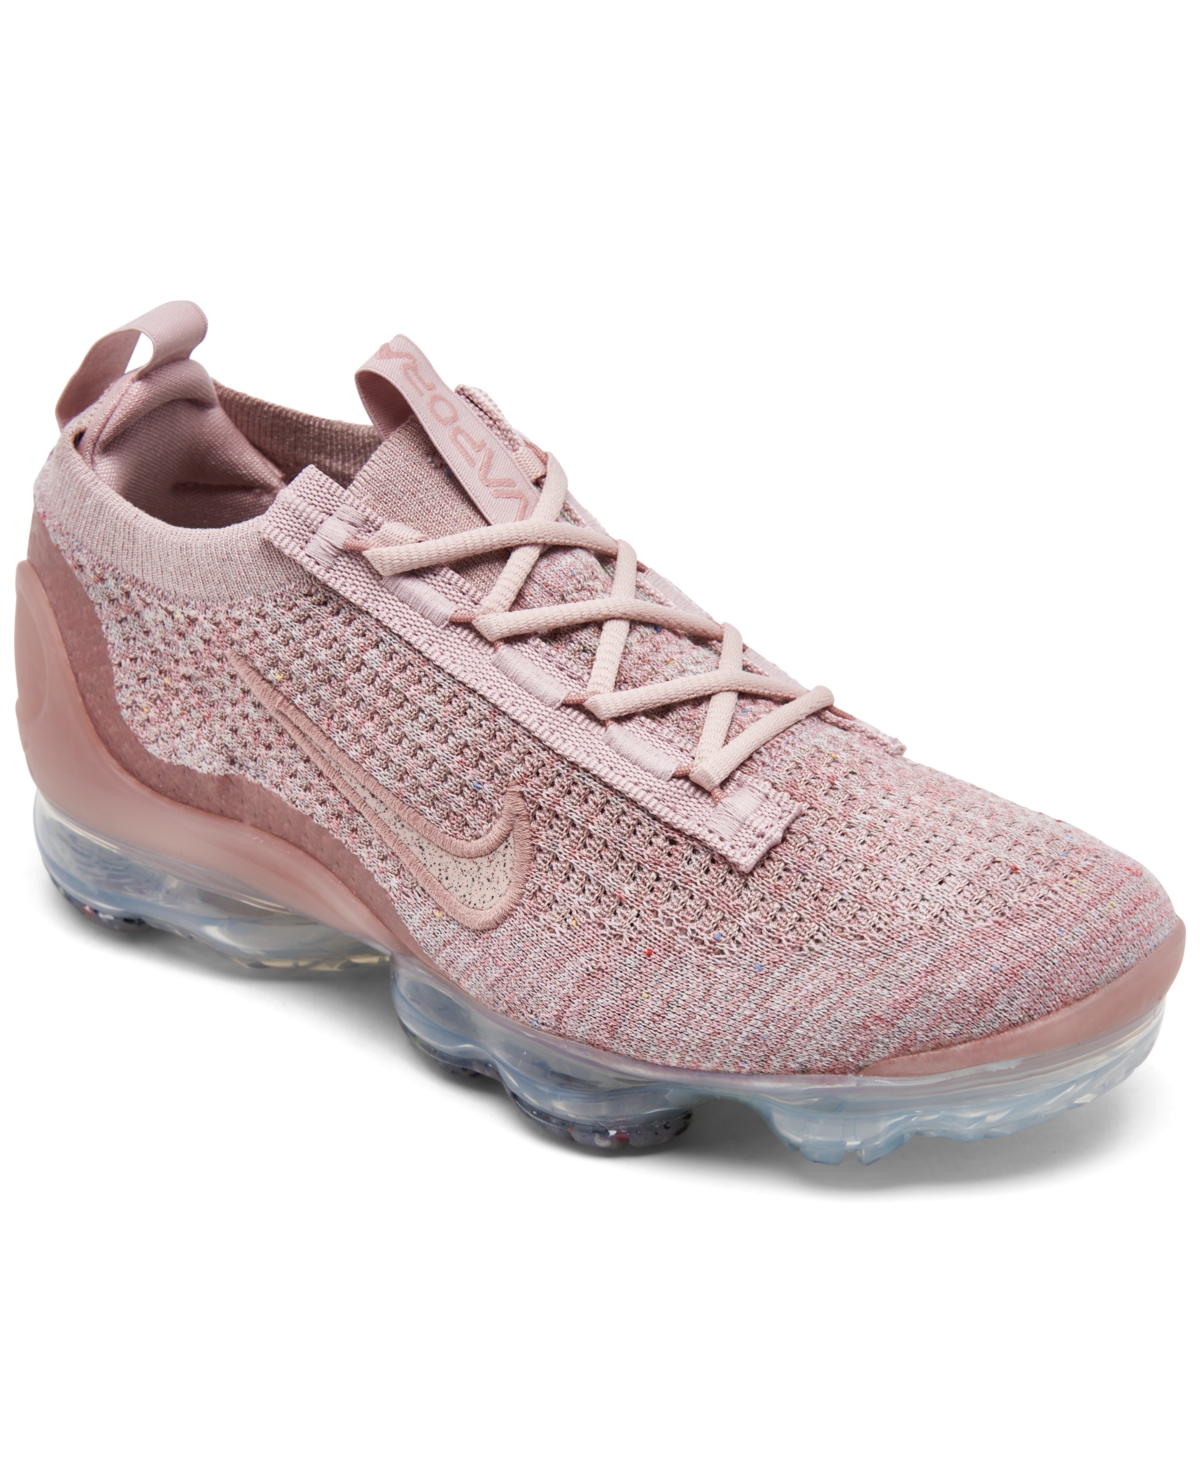 Nike Women's Air Vapormax 2021 Flyknit Running Sneakers from Finish Line